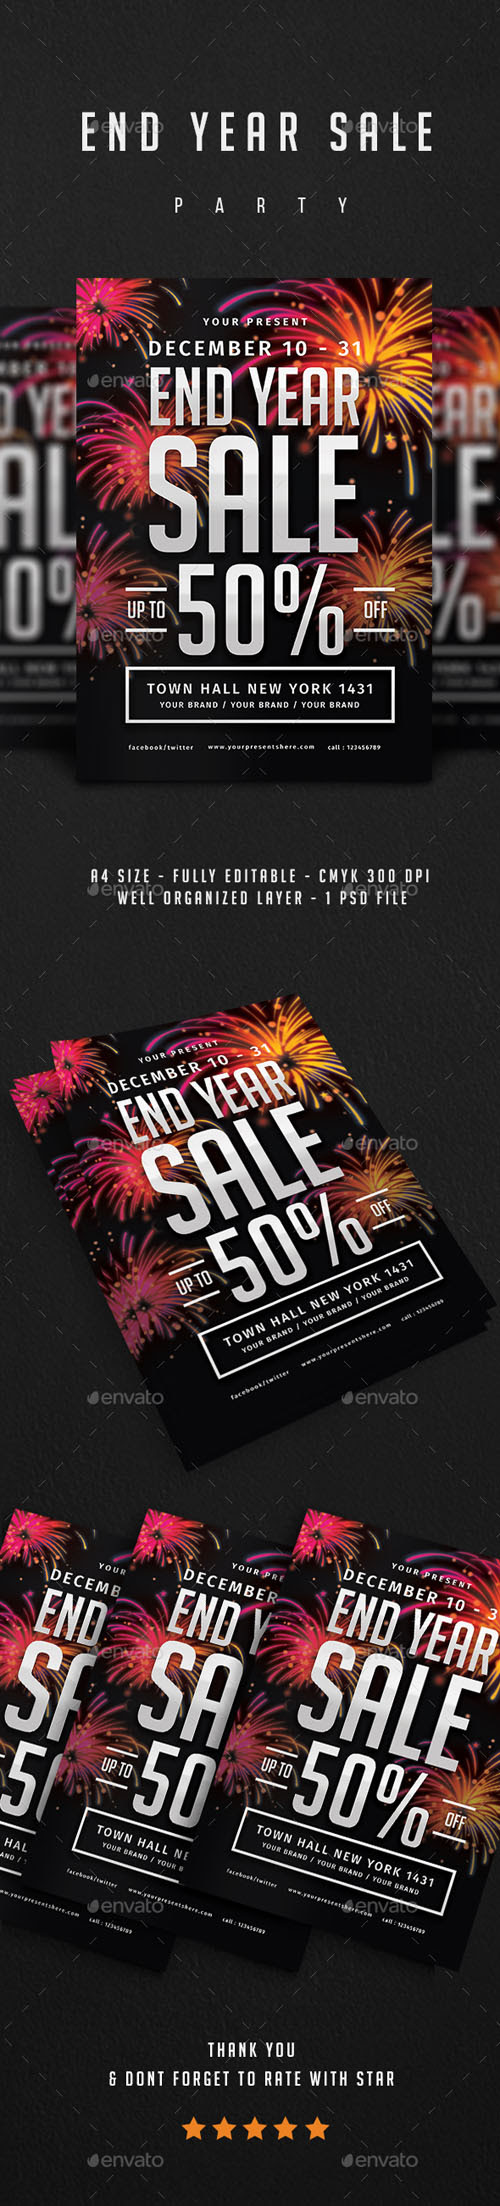 End Of Year Flyer : 3600+ premium psd flyer templates + facebook covers for event, party or ...